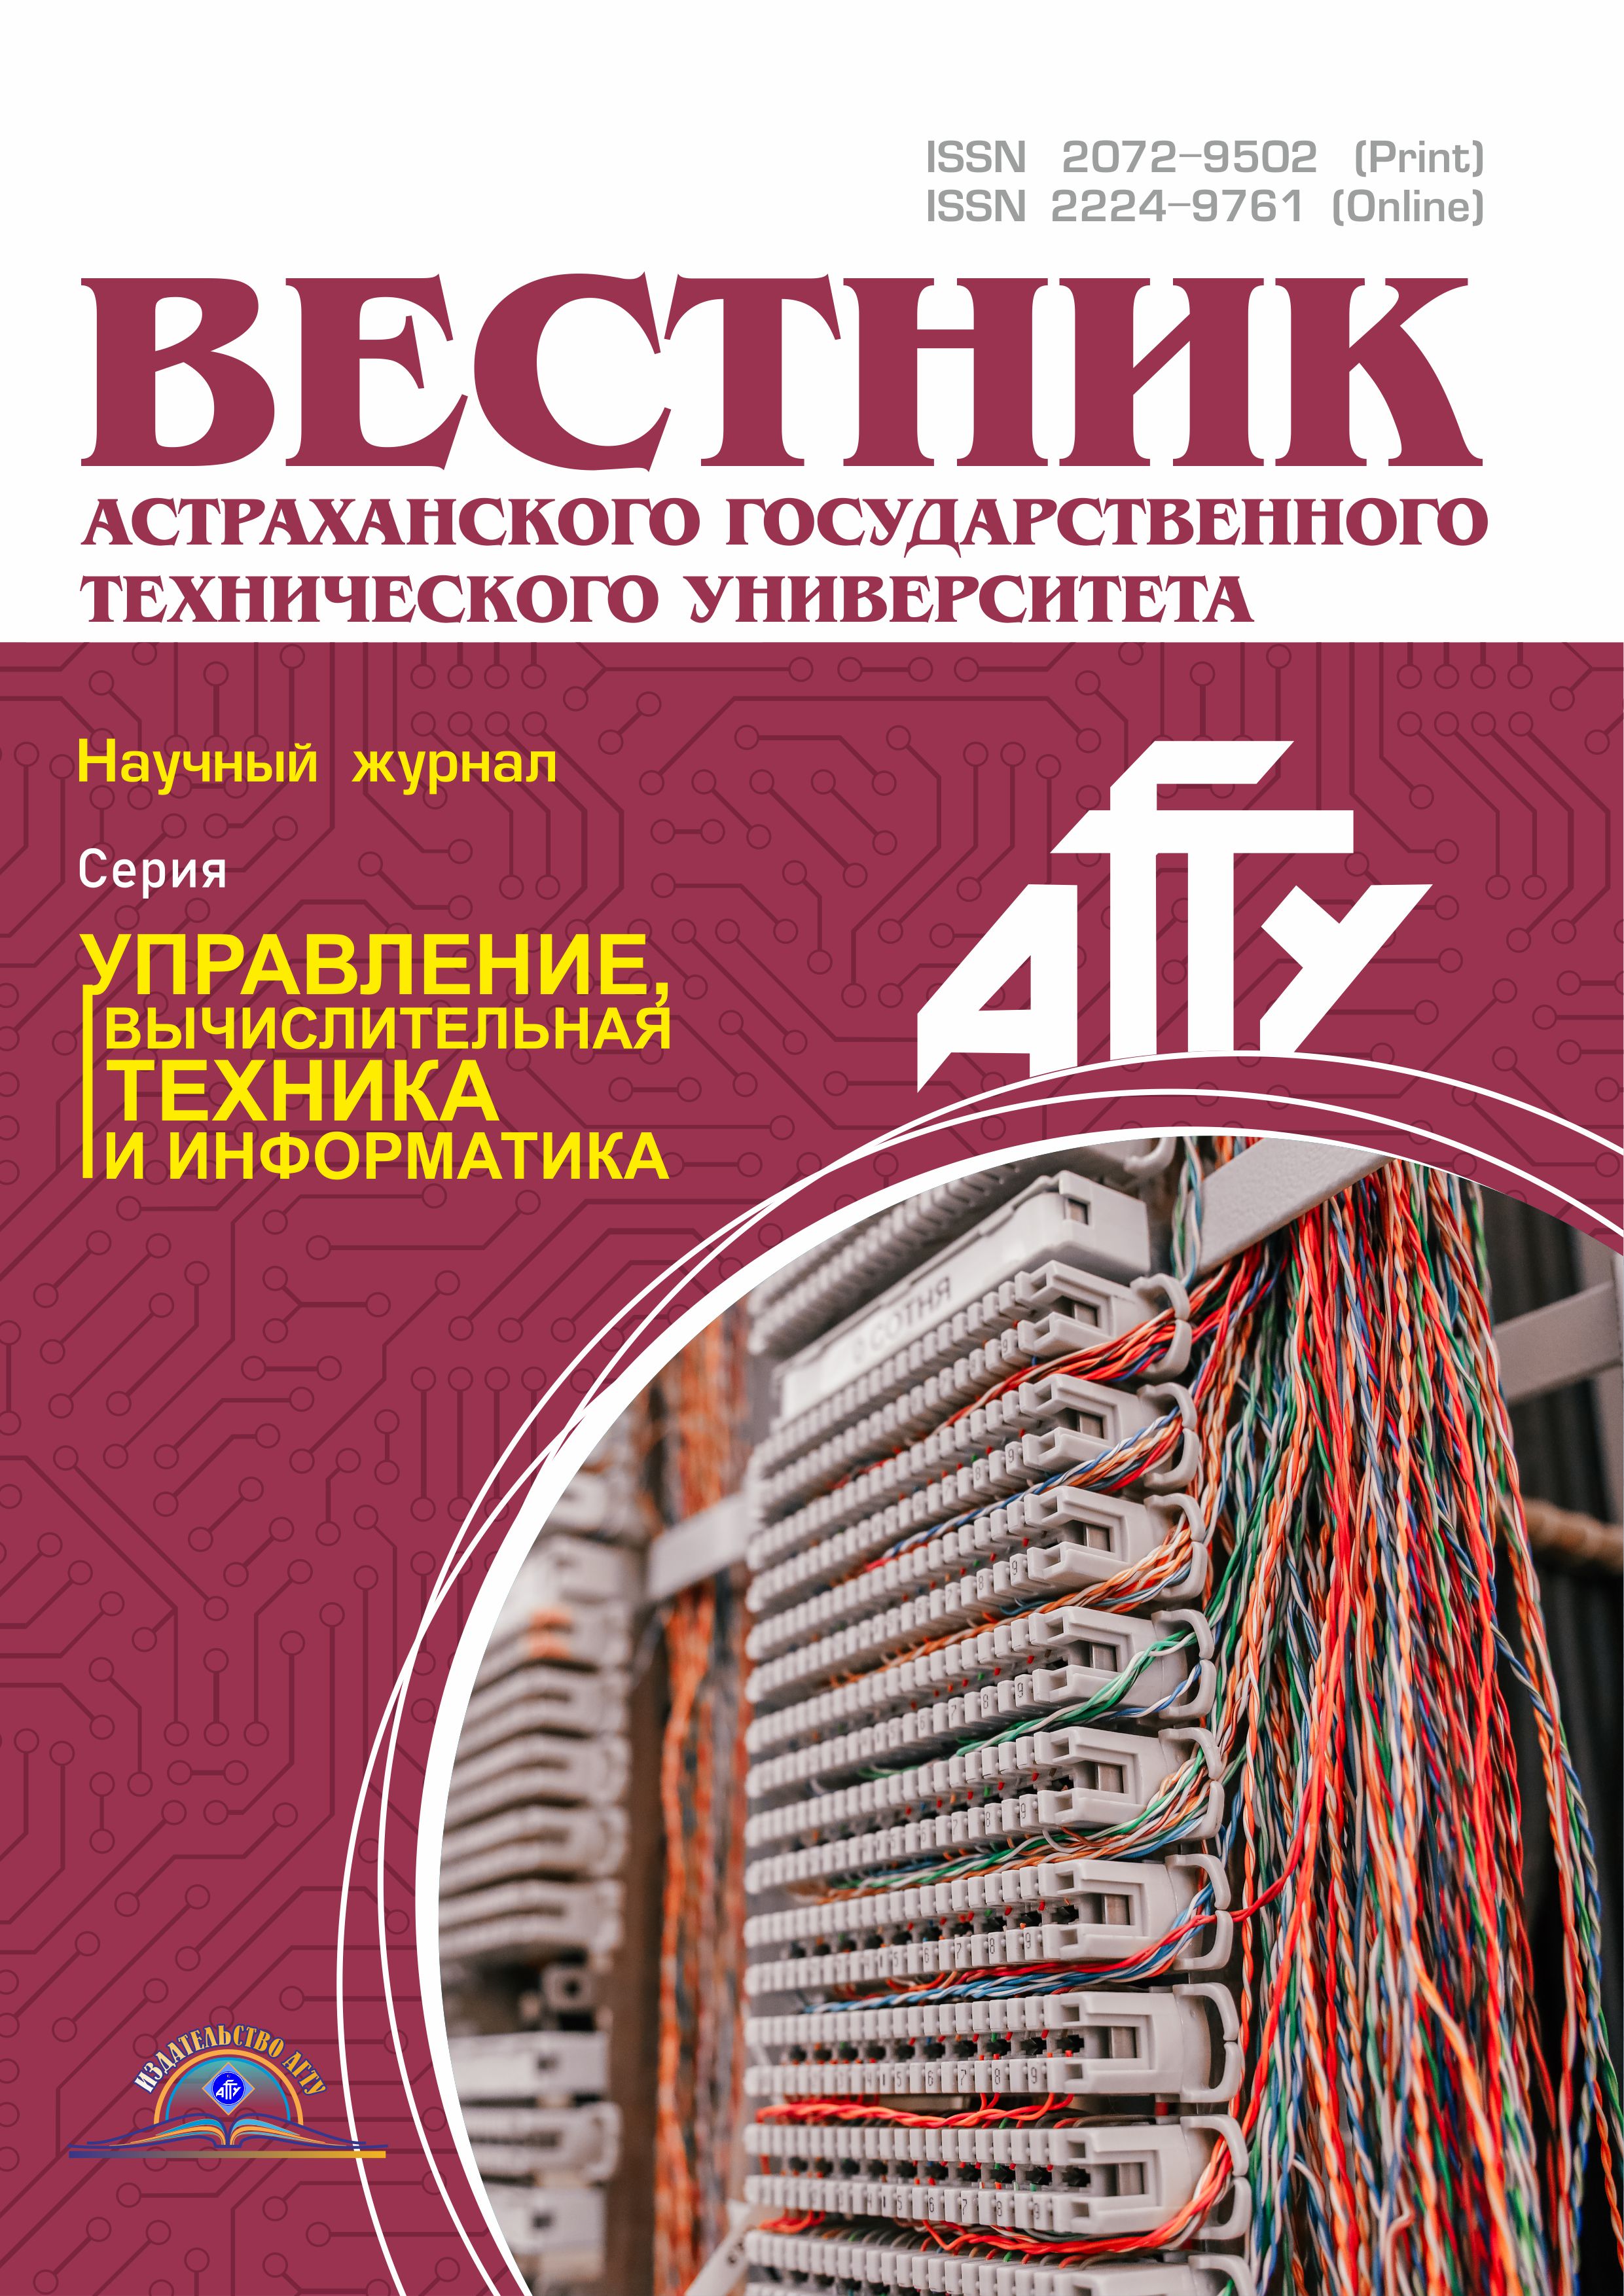                         DESIGN AND IMPLEMENTATION OF INTEGRATED INFORMATION SYSTEM FOR MINISTRY OF EMERGENCY SITUATIONS OF RUSSIA
            